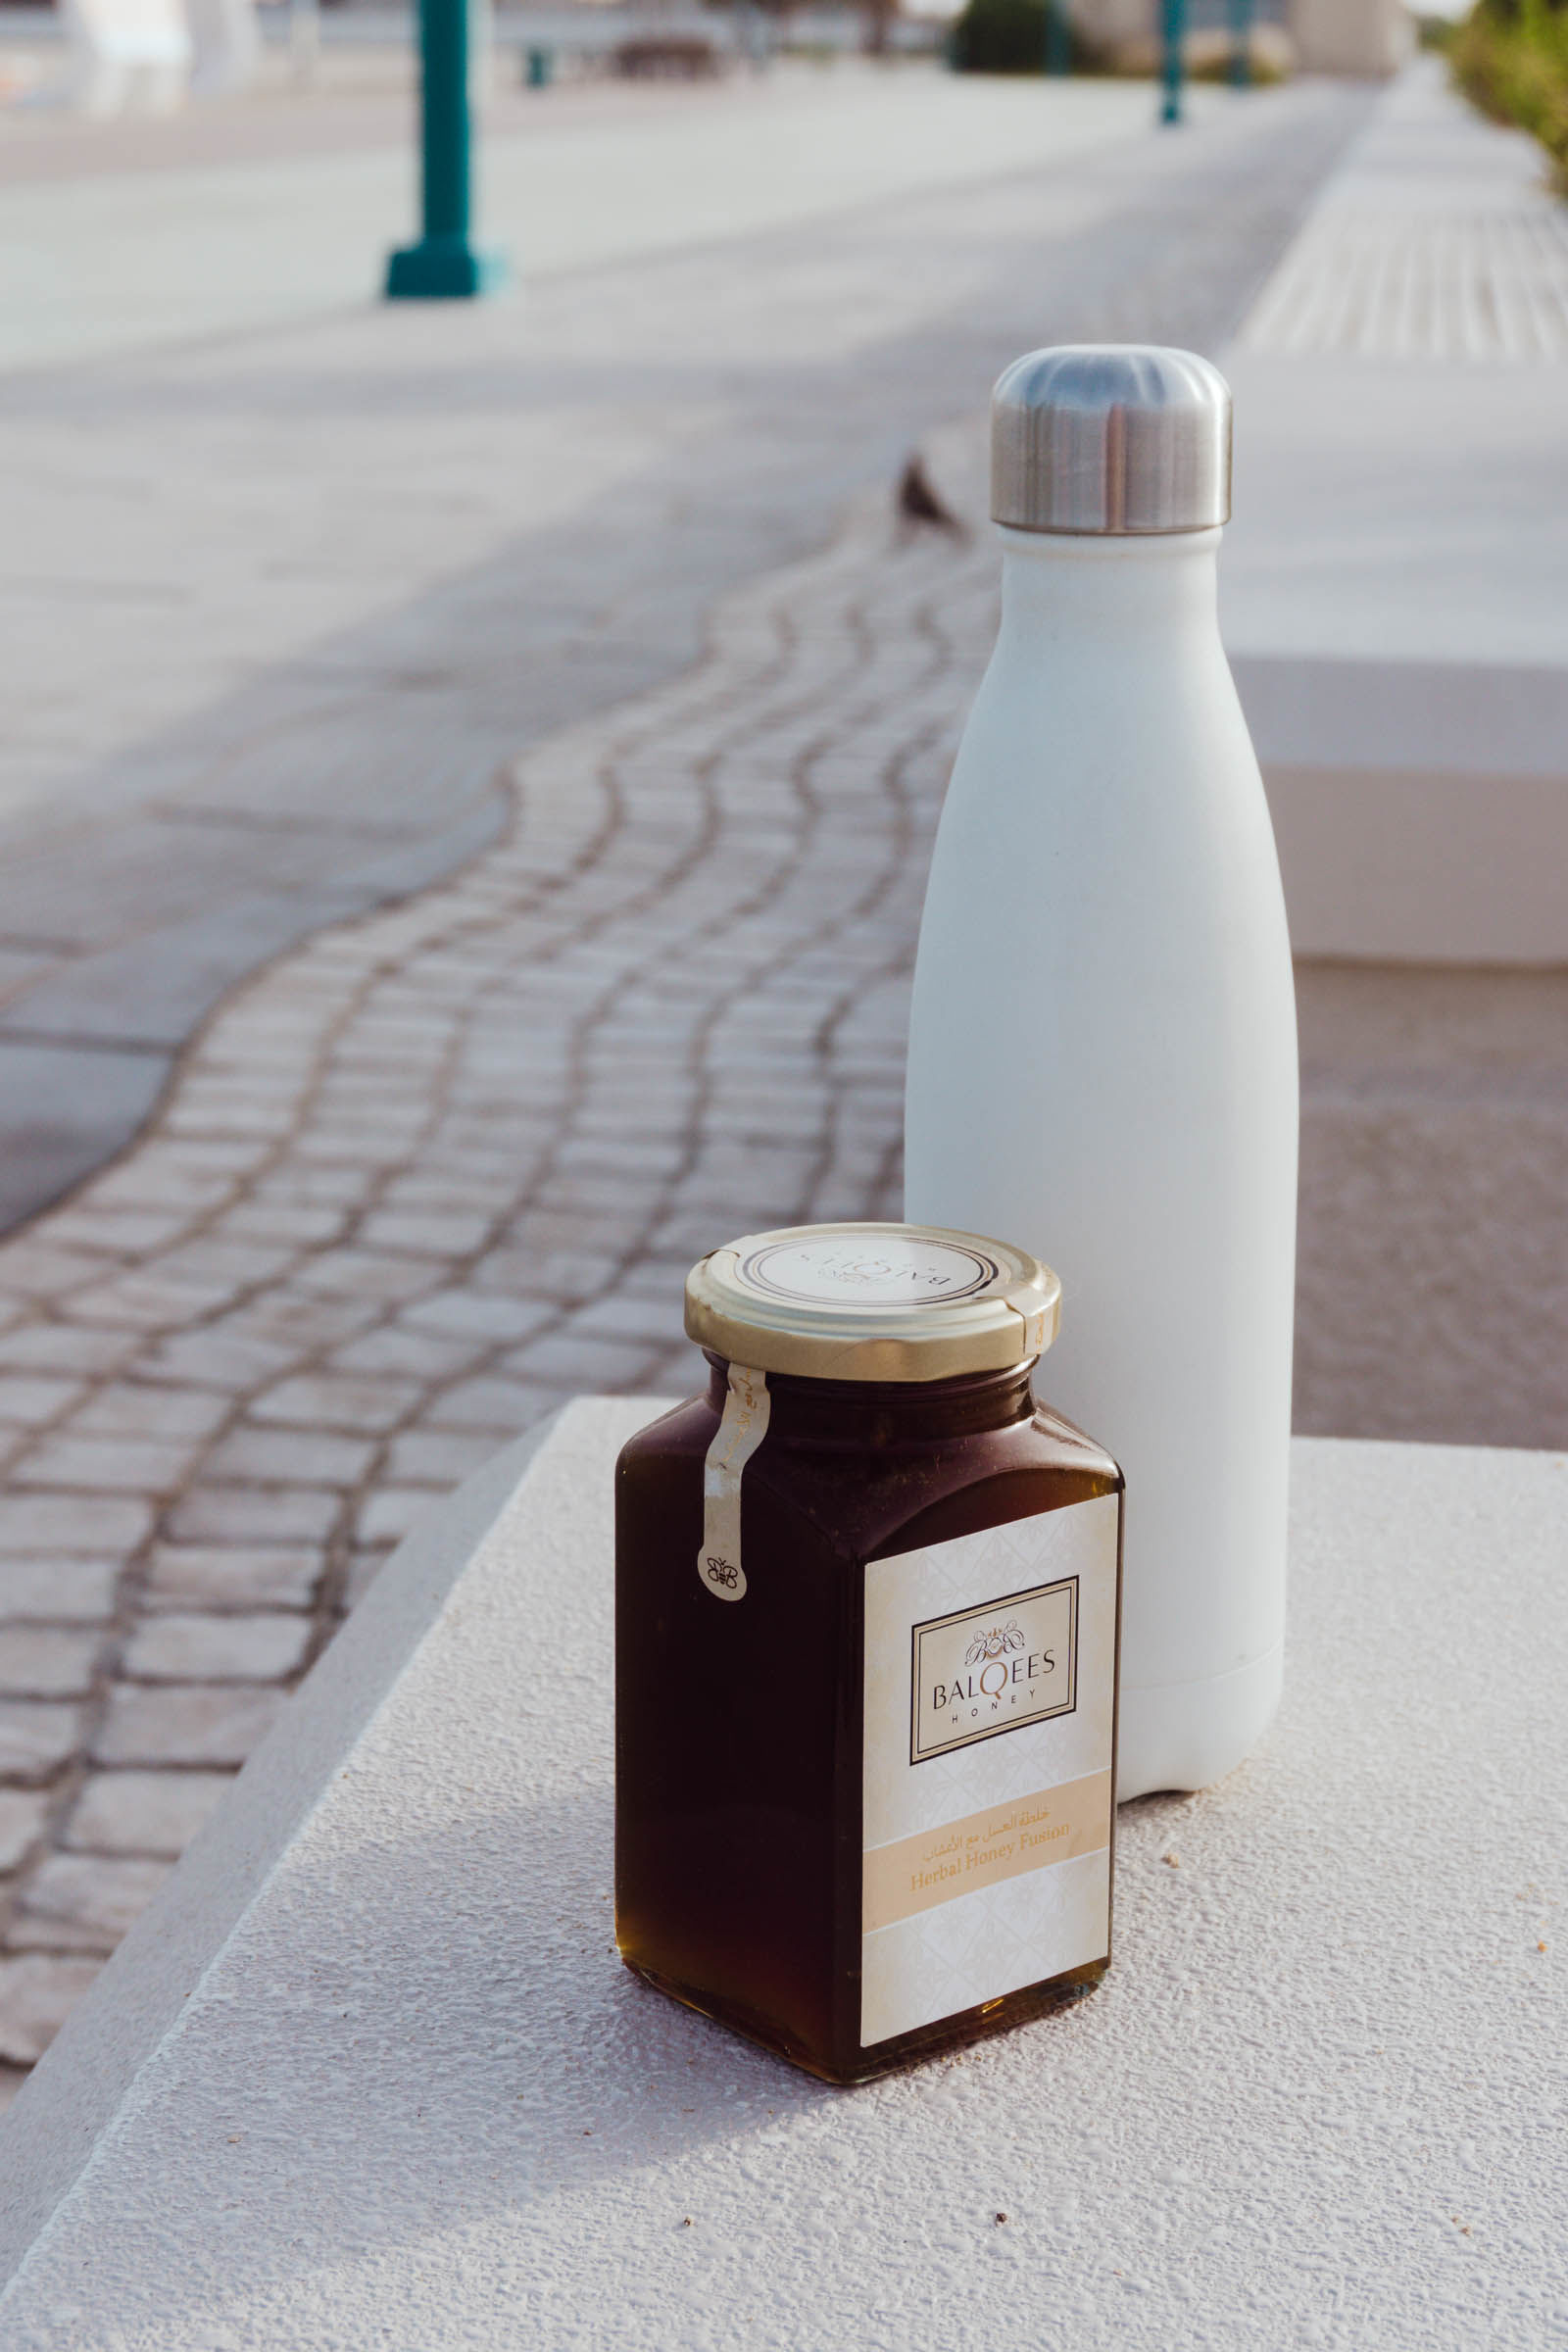 Raw honey with a water bottle by a running track